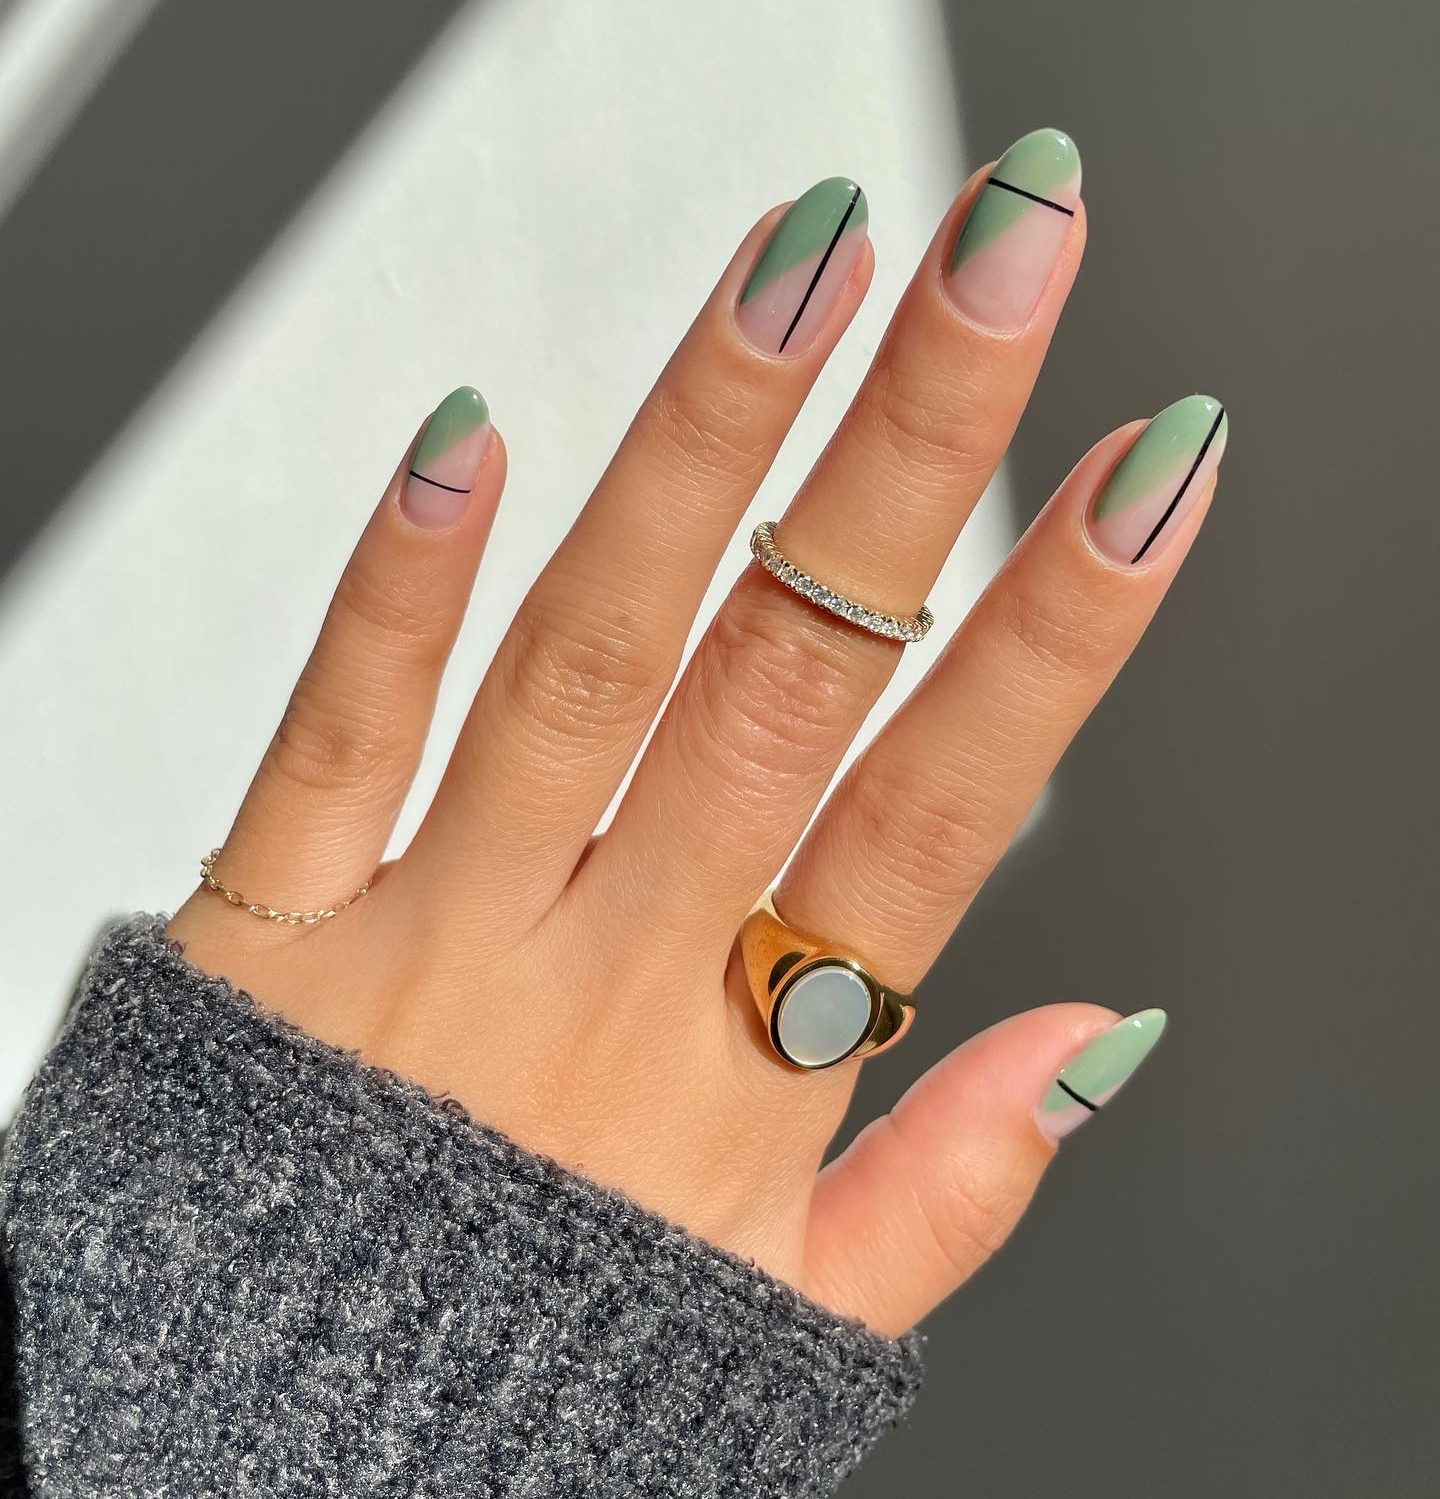 Short Round Light Green Nails with Thin Black Lines